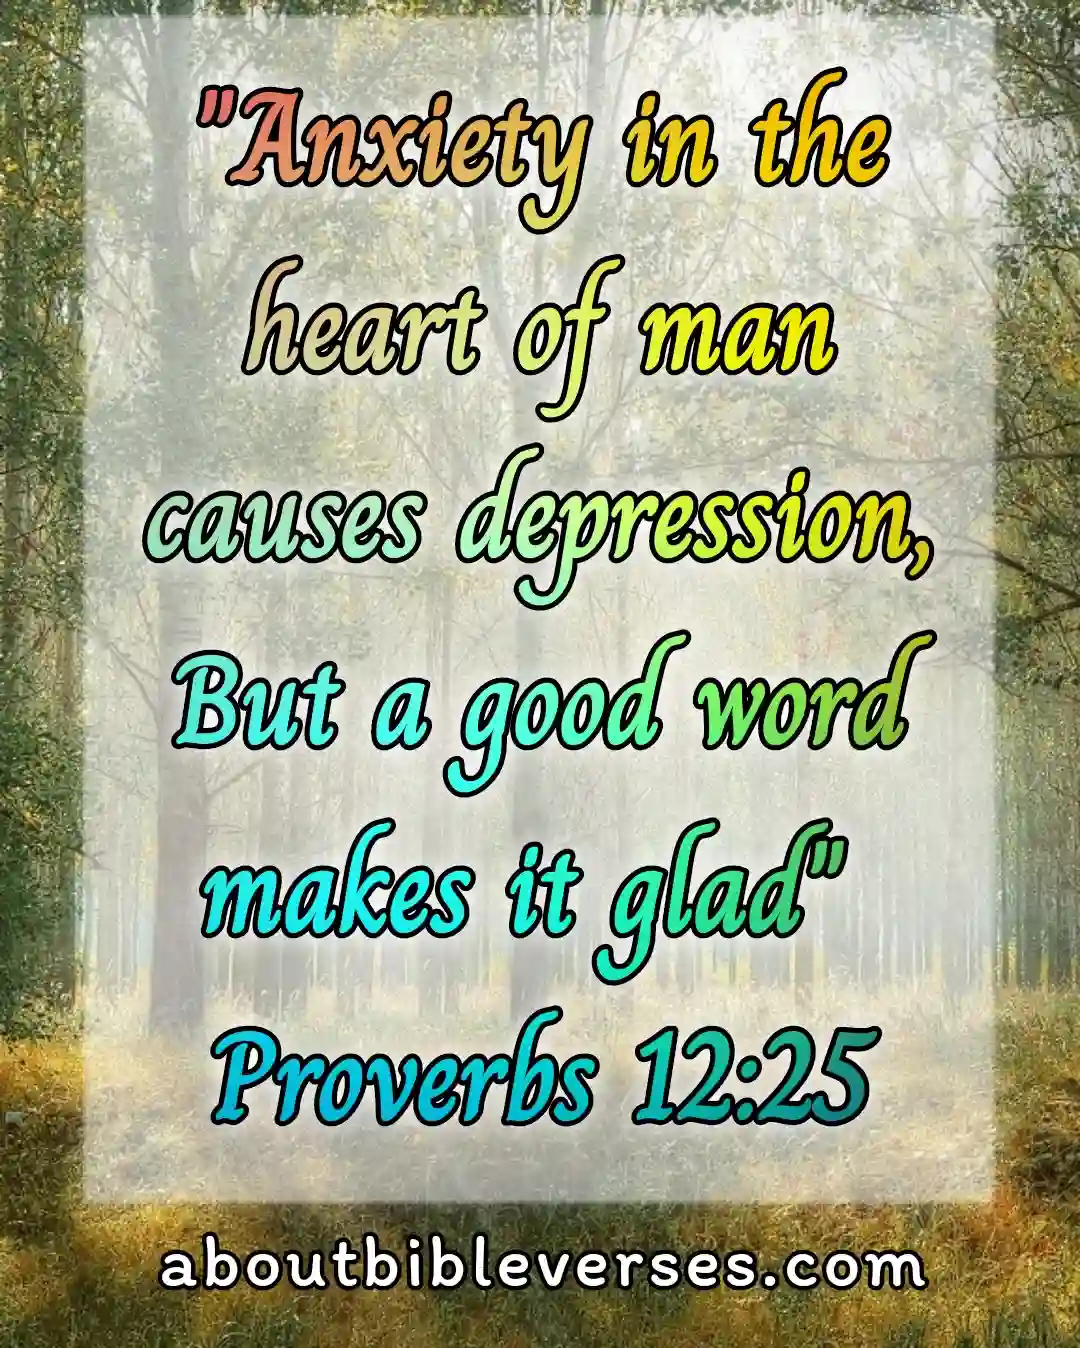 bible verses about anxiety (Proverbs 12:25)